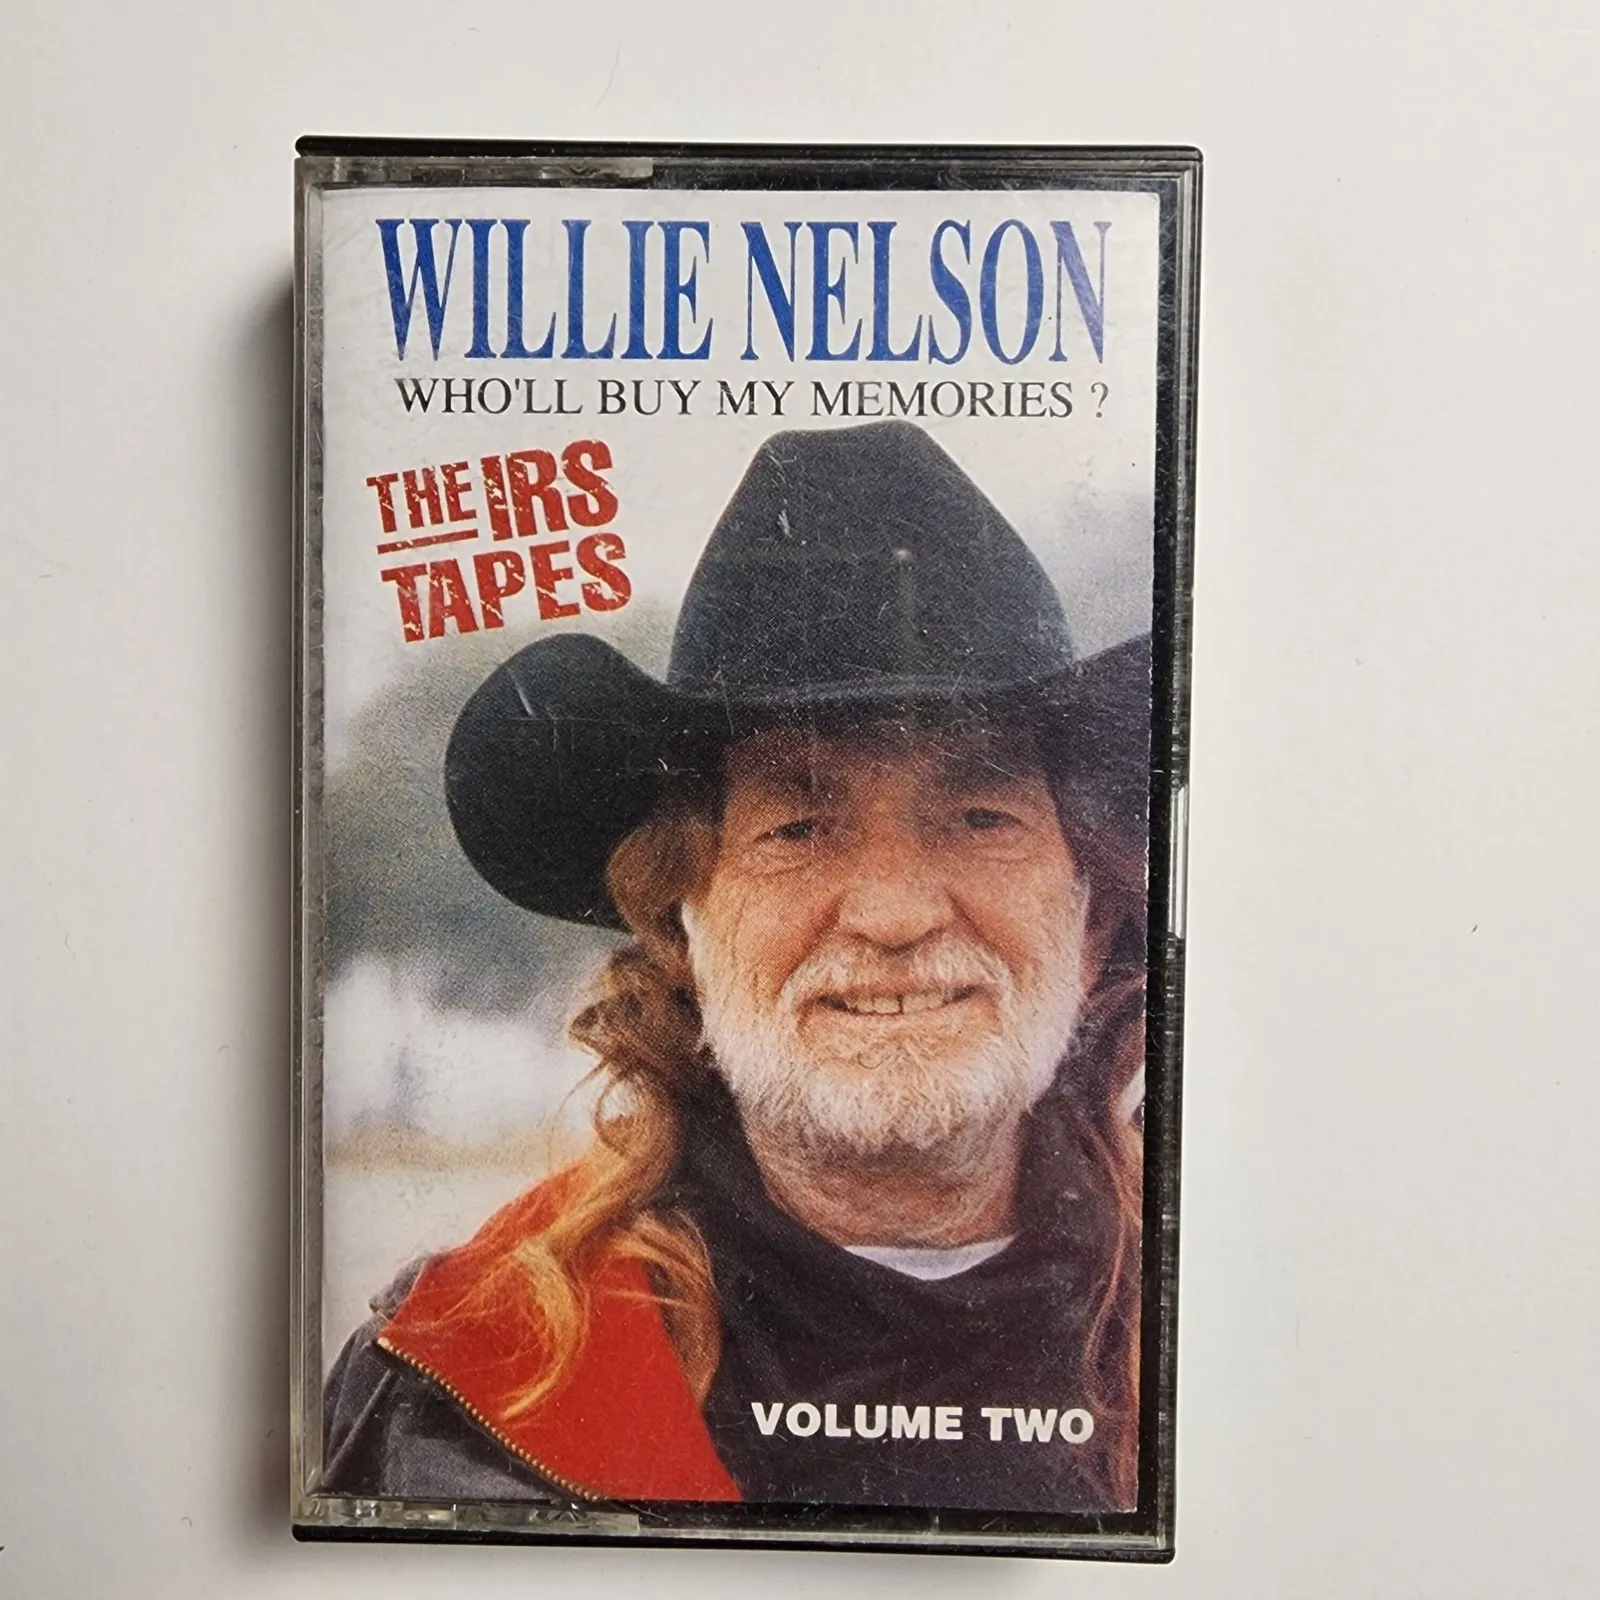 Willie Nelson Who'll Buy My Memories? Vol.2 Cassette 1991 Sony Music Untested